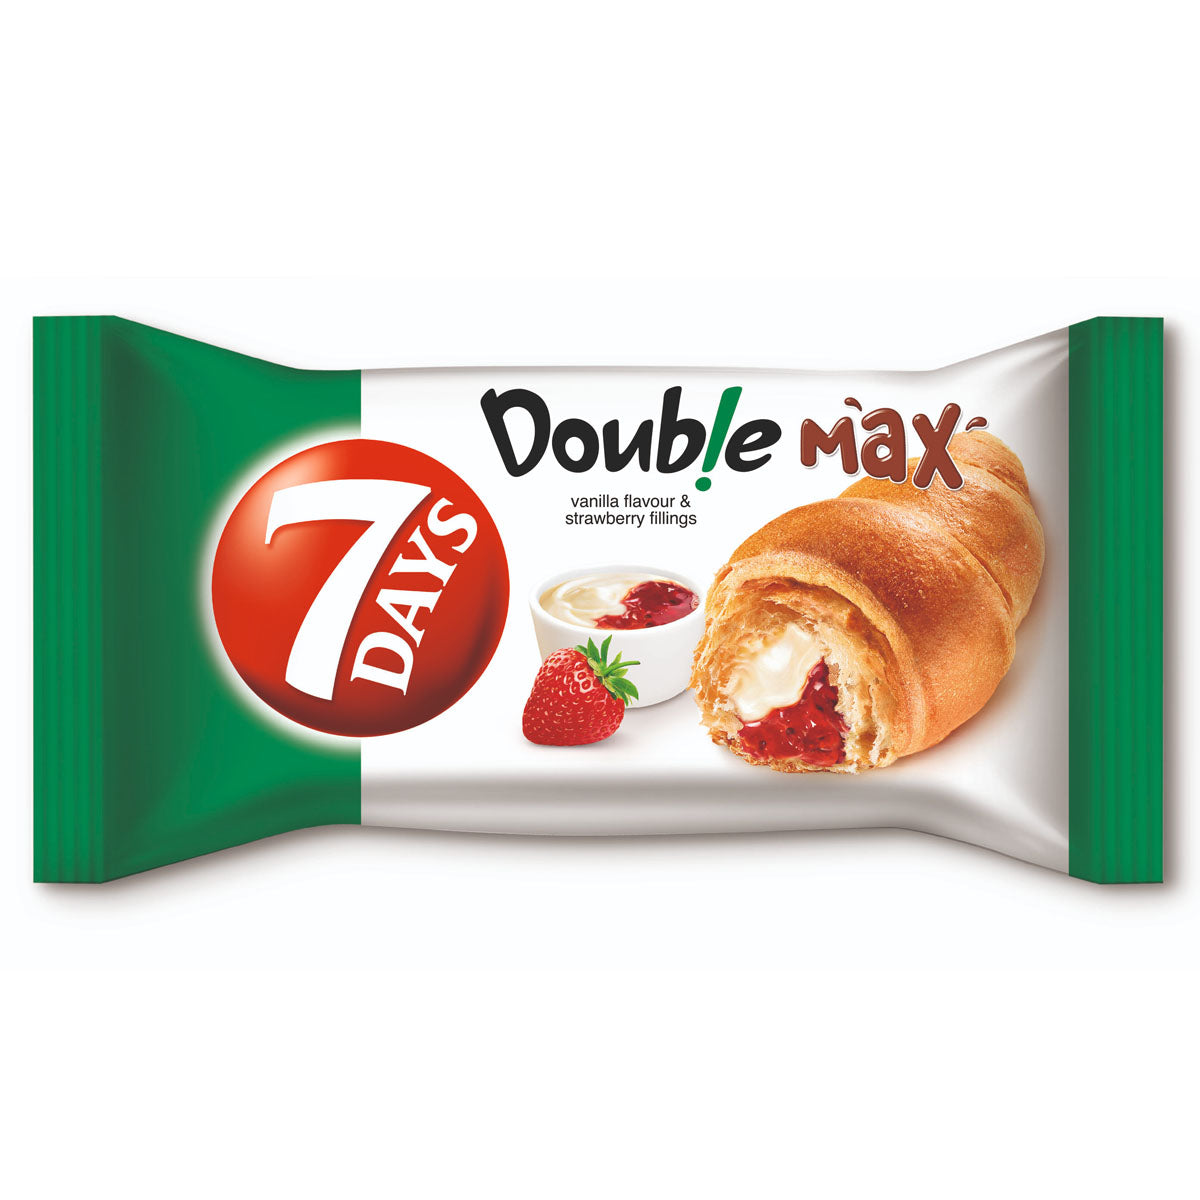 7 Days - Double Vanilla & Strawberry Croissant - 80g - Continental Food Store